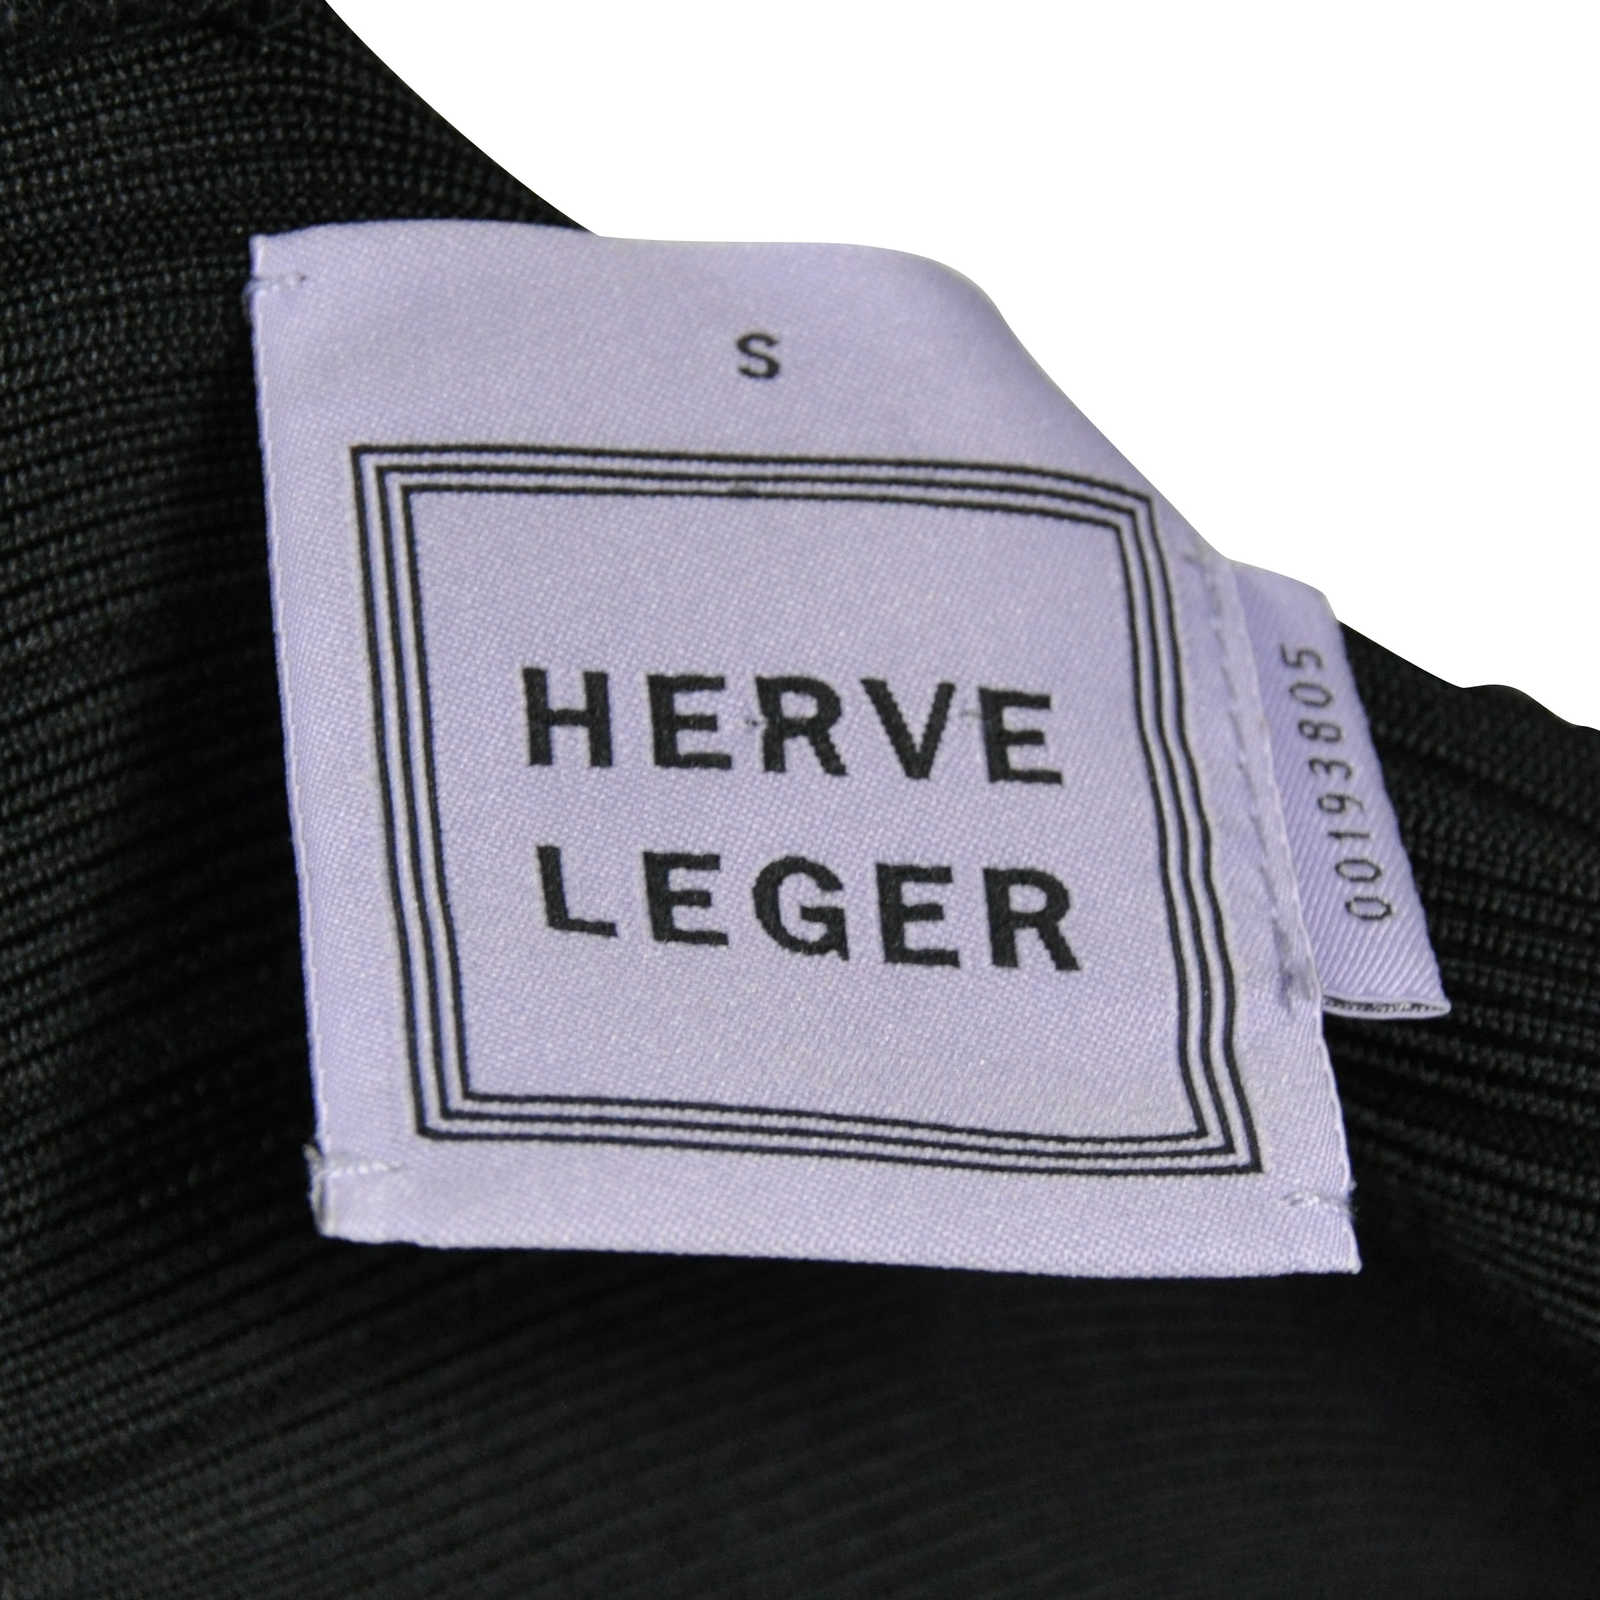 Herve Leger Logo - Authentic Pre Owned Hervé Leger Joanne Dress (PSS 220 00013). THE